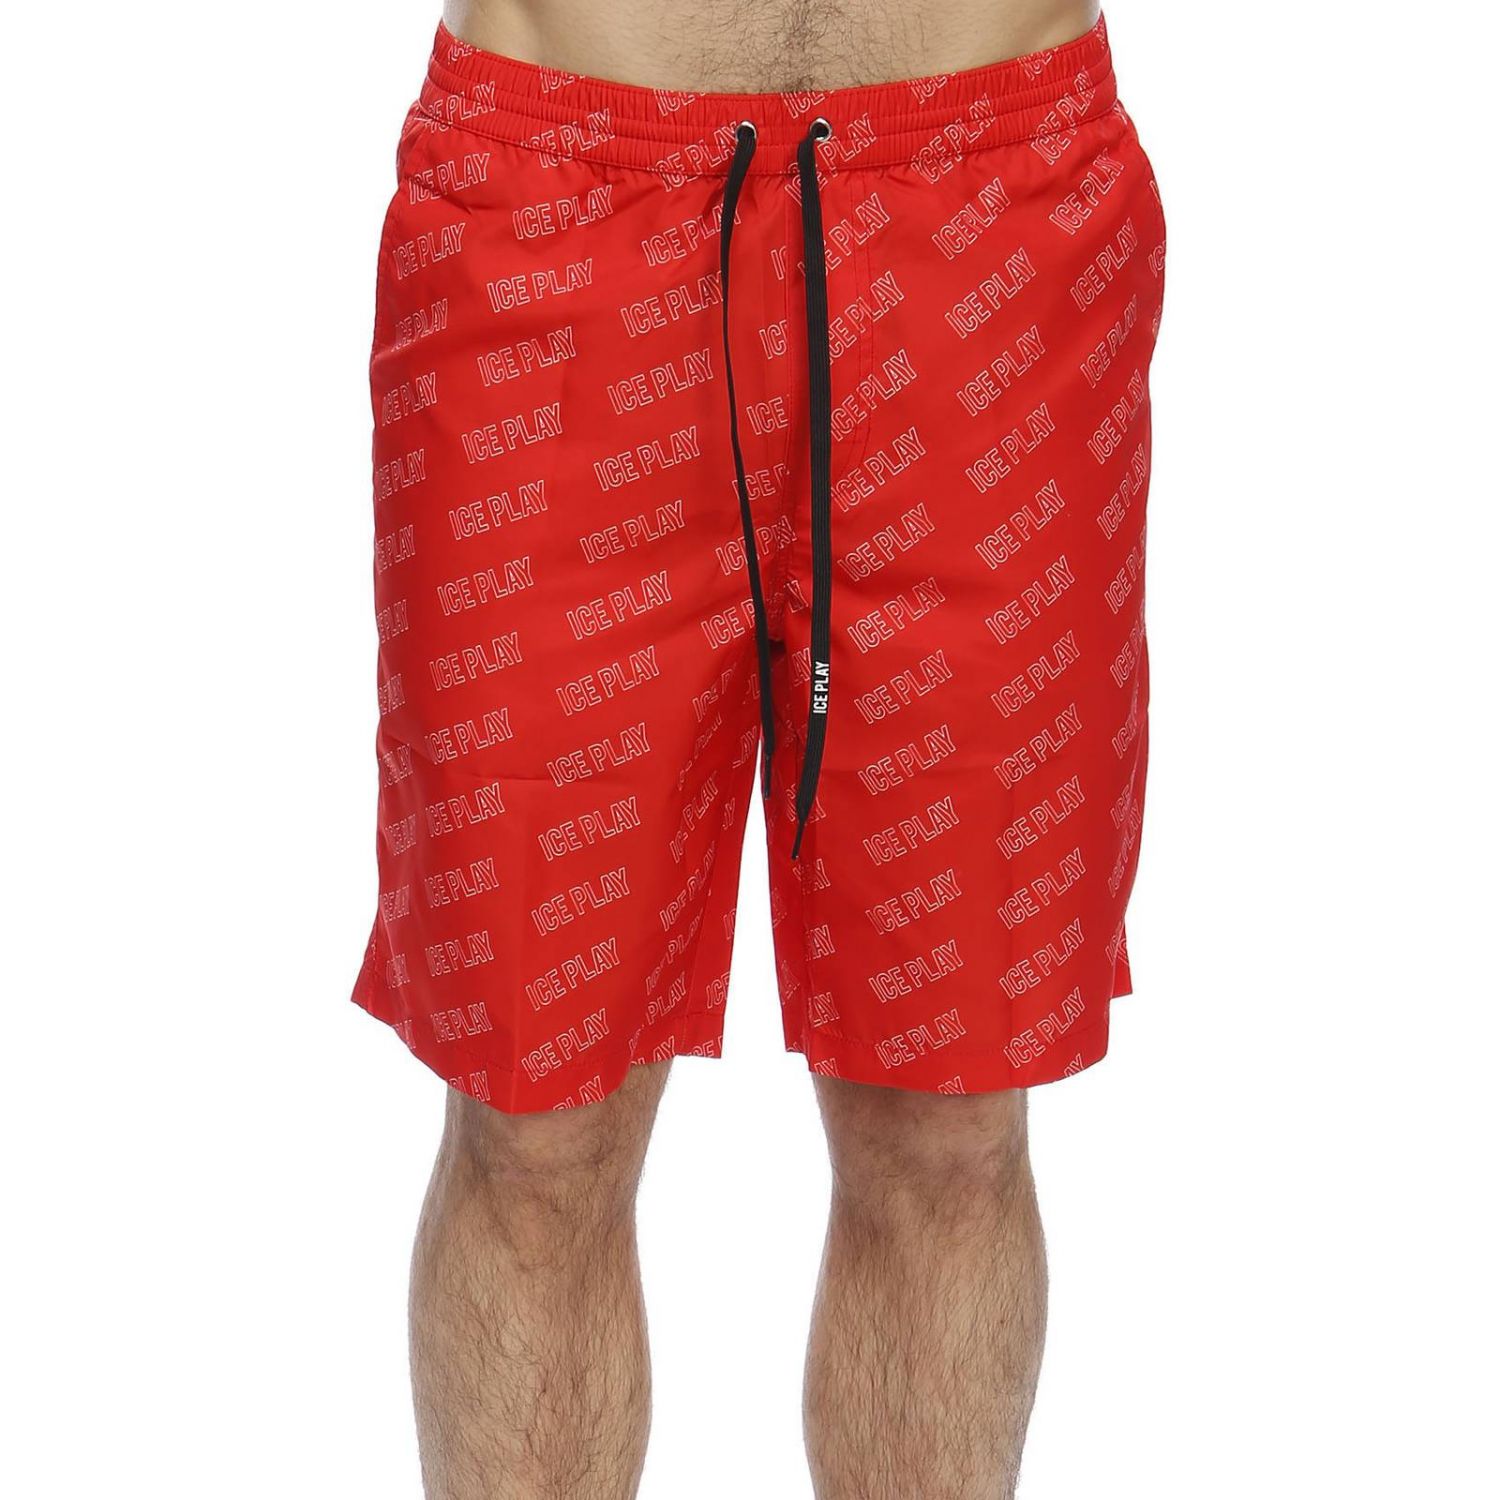 Ice Play Outlet: Swimsuit men | Swimsuit Ice Play Men Red | Swimsuit ...